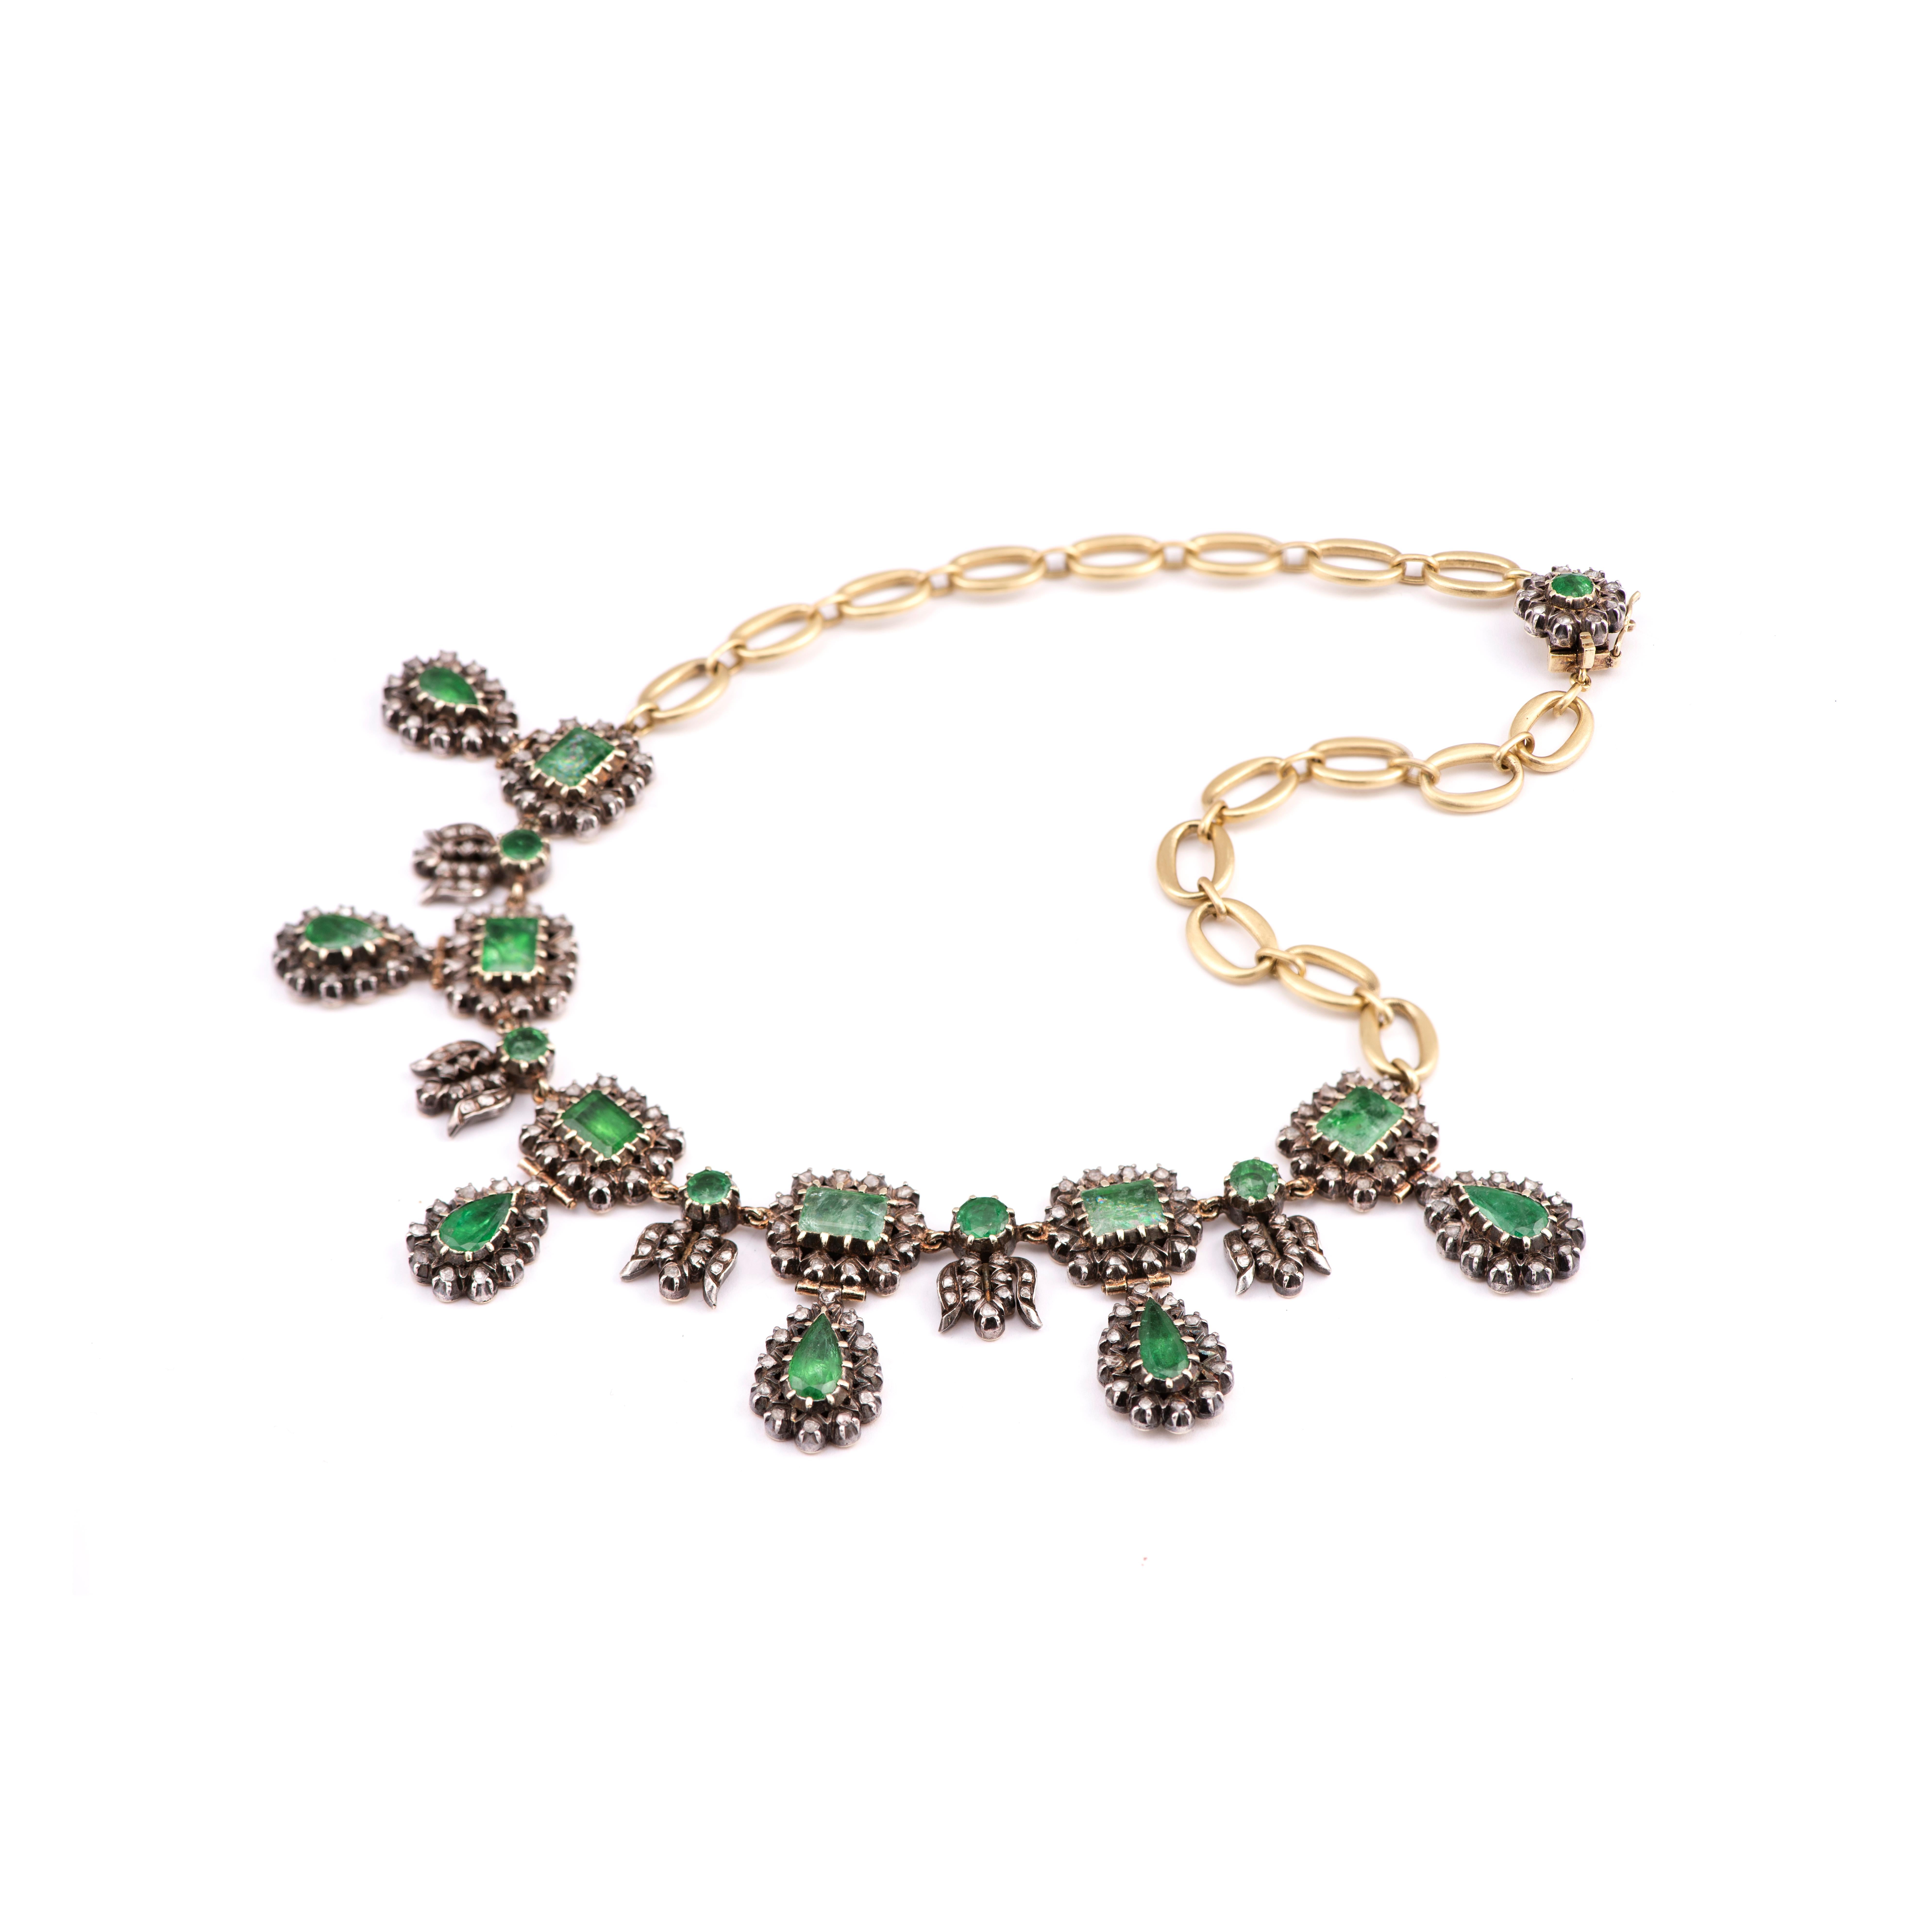 A stunning antique Georgian Era necklace that has been brilliantly re-designed into a contemporary necklace with signature handmade 18k yellow gold O-links and Georgian detail clasp.  

Diamond and Emerald carat weights are unknown.  17.5 inches